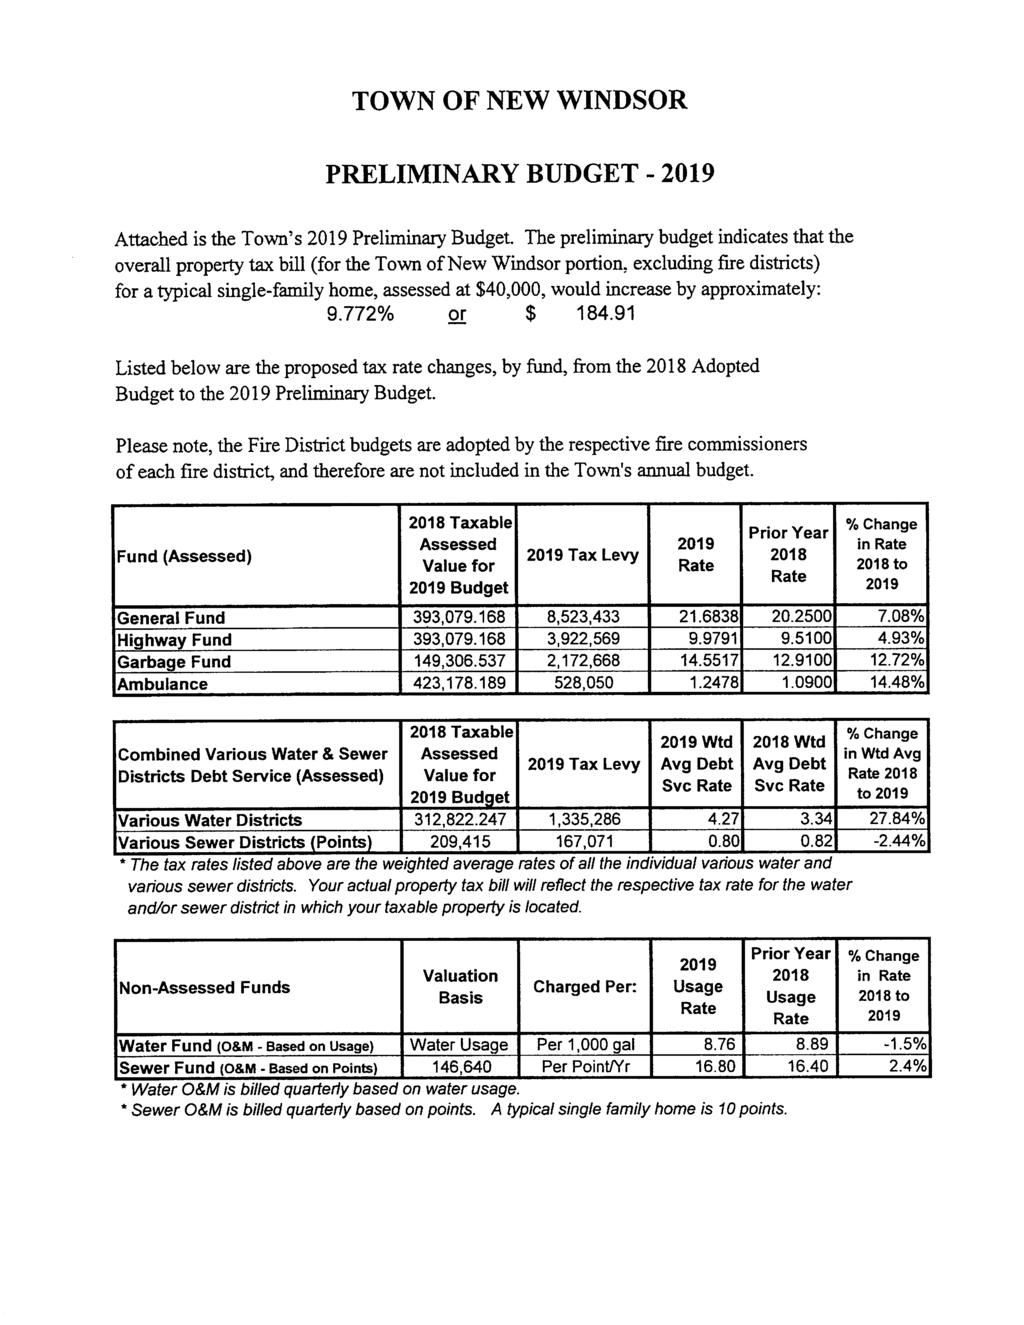 PRELIMINARY BUDGET - 2019 Attached is the Town's 2019 Preliminaiy Budget The preliminary budget indicates that the overall property tax bill (for the Town of New Windsor portion, excluding fire